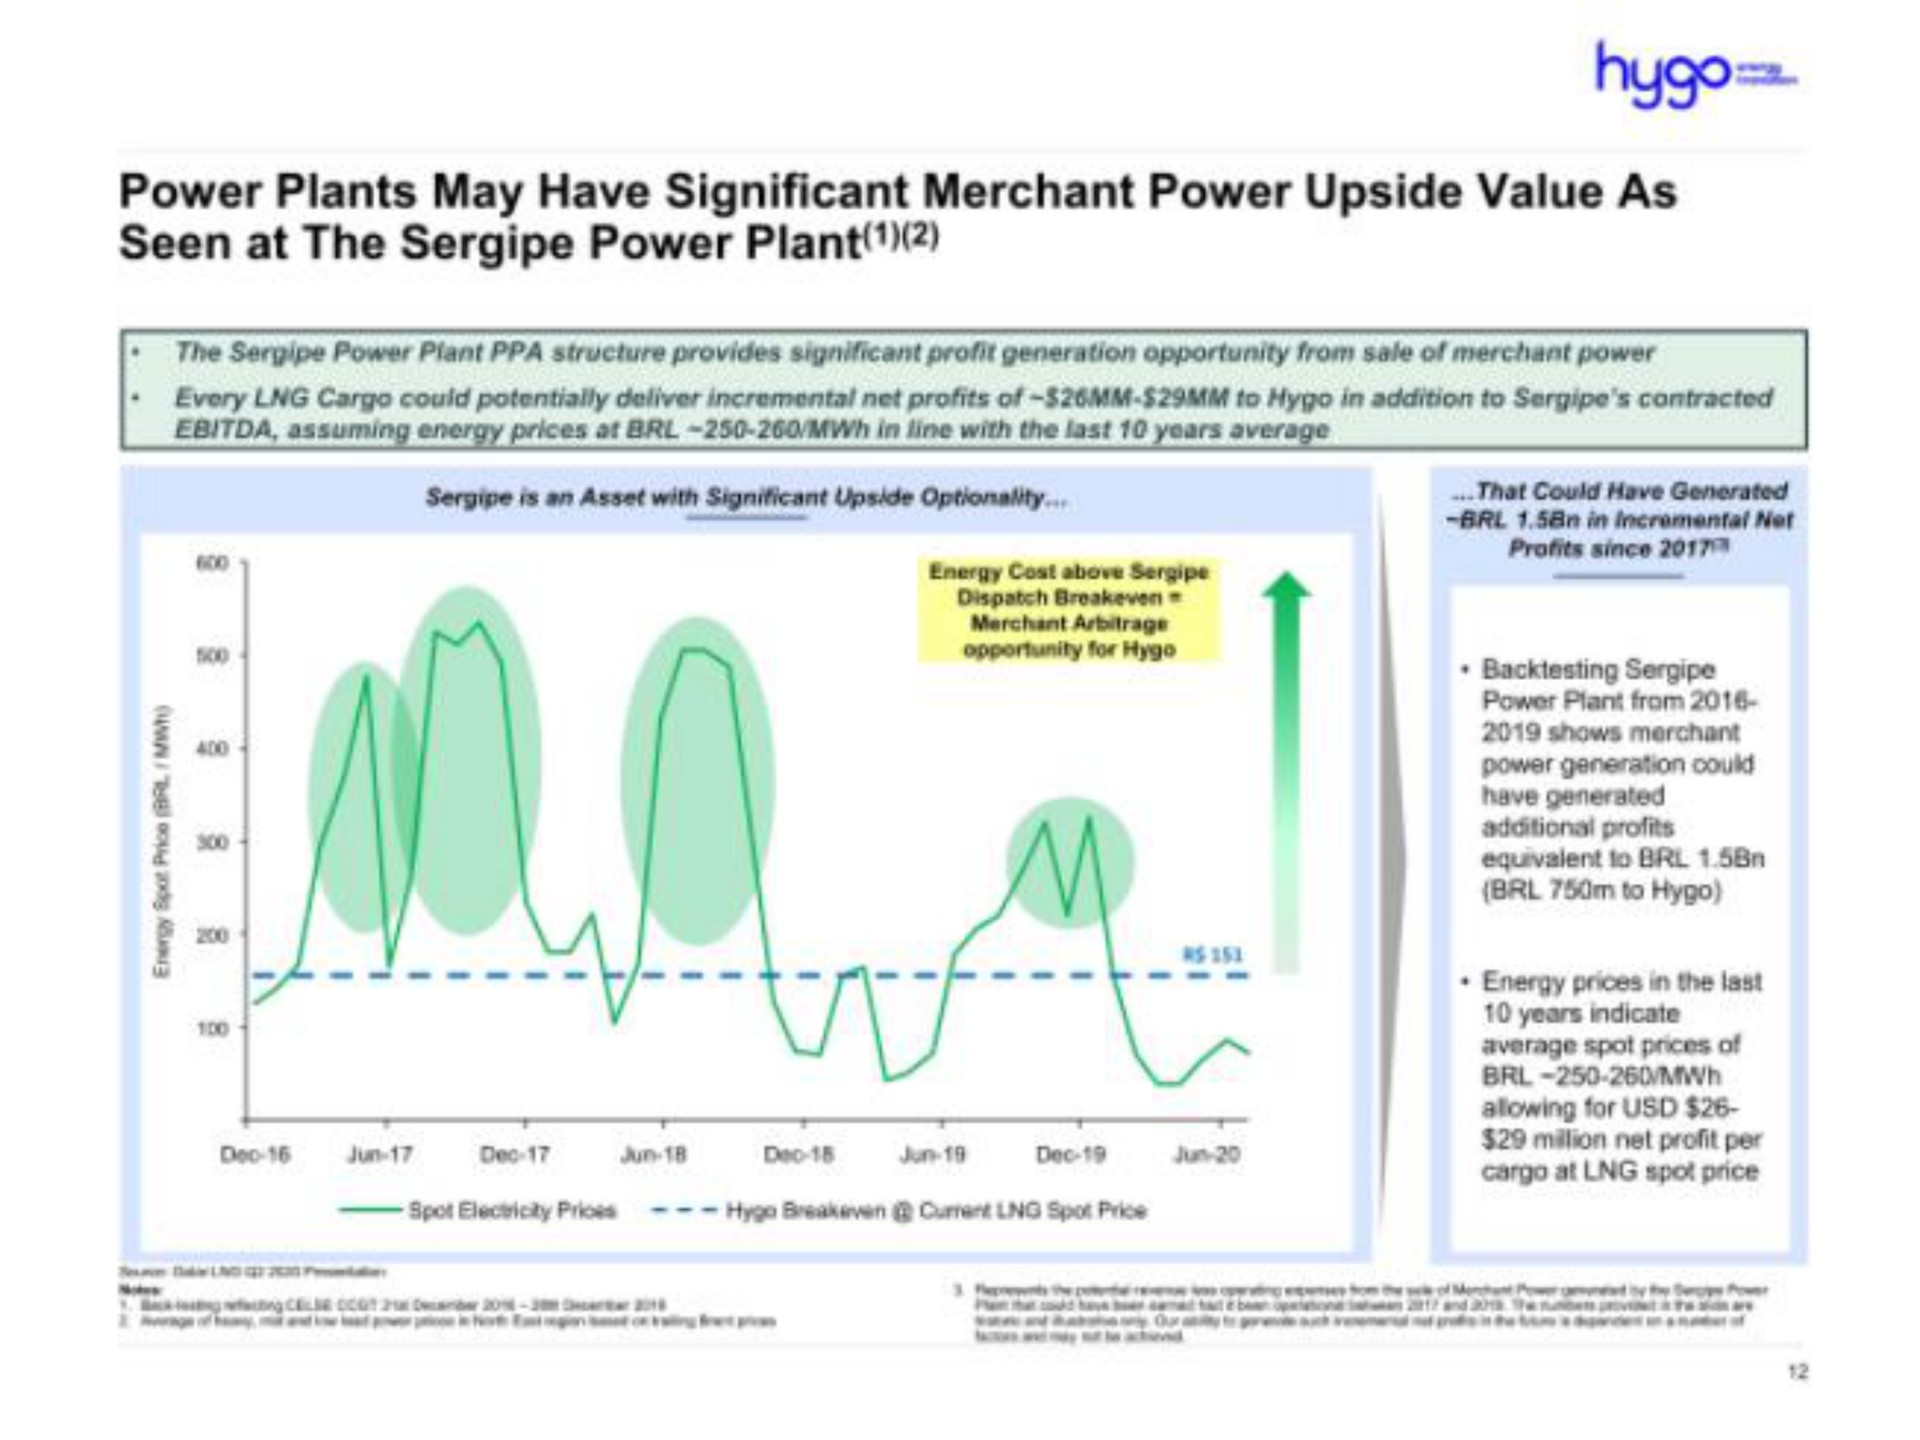 power plants may have significant merchant power upside value as seen at the power plant | Hygo Energy